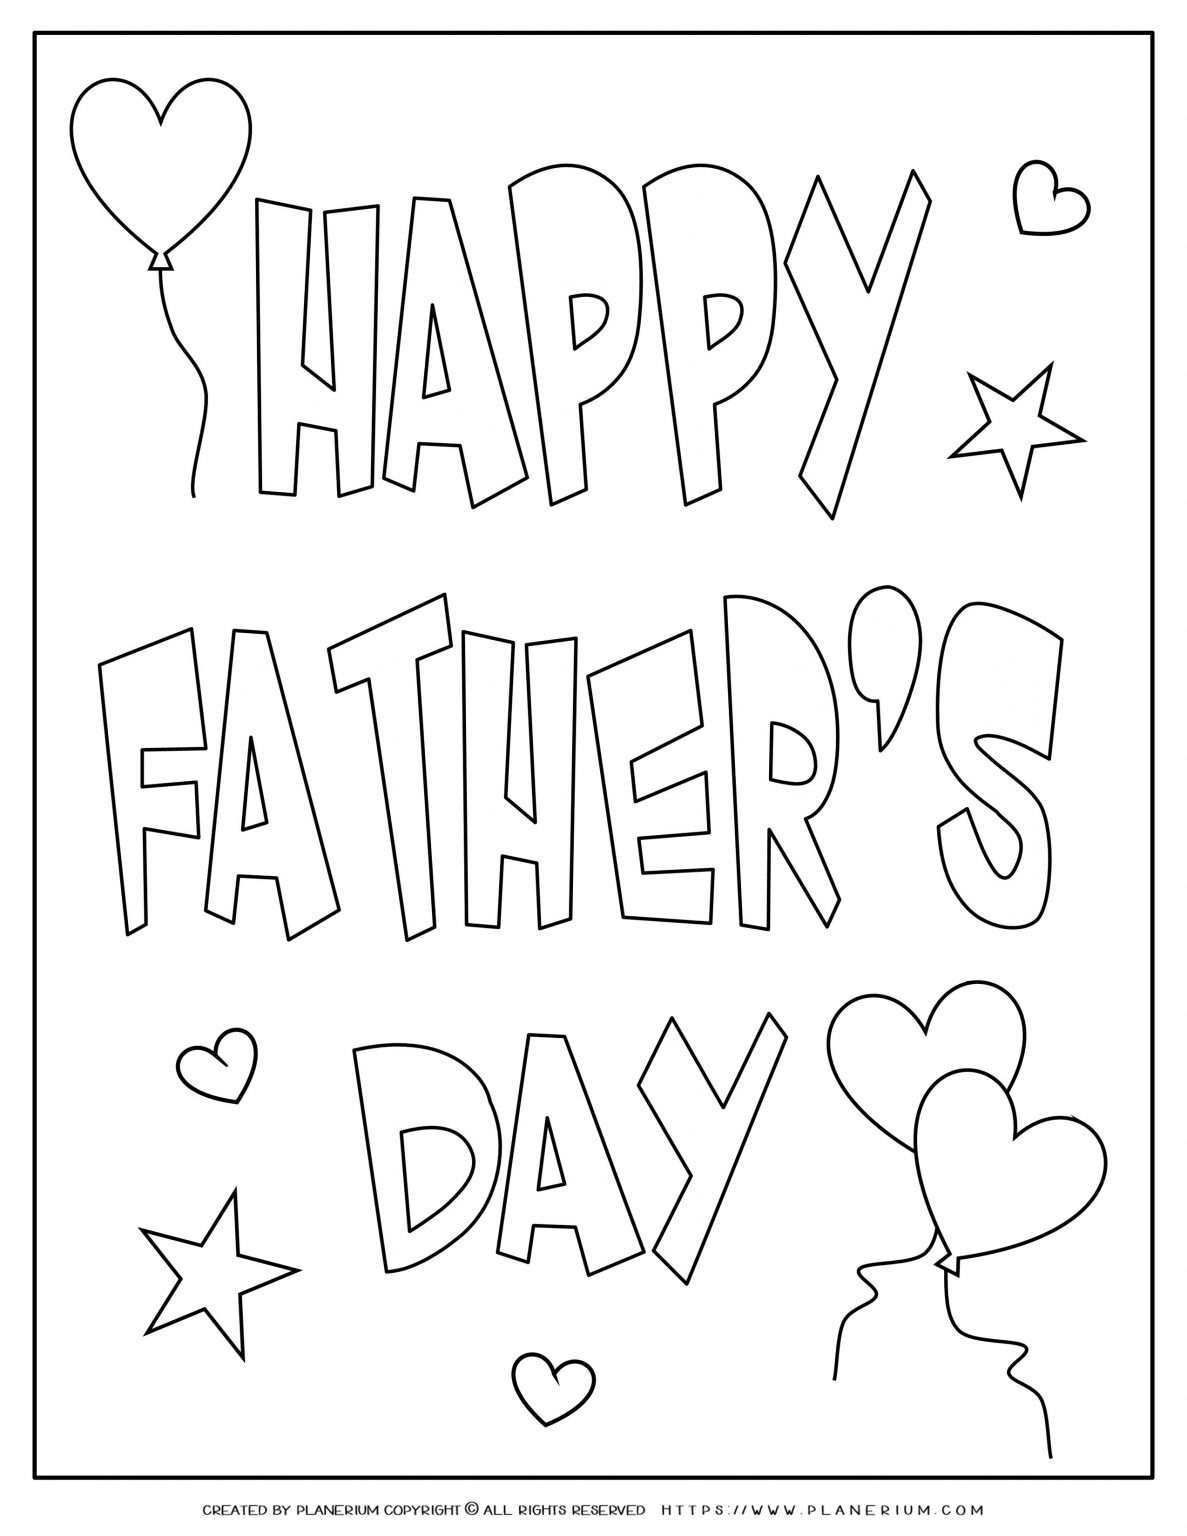 father-s-day-coloring-page-my-dad-is-my-hero-planerium